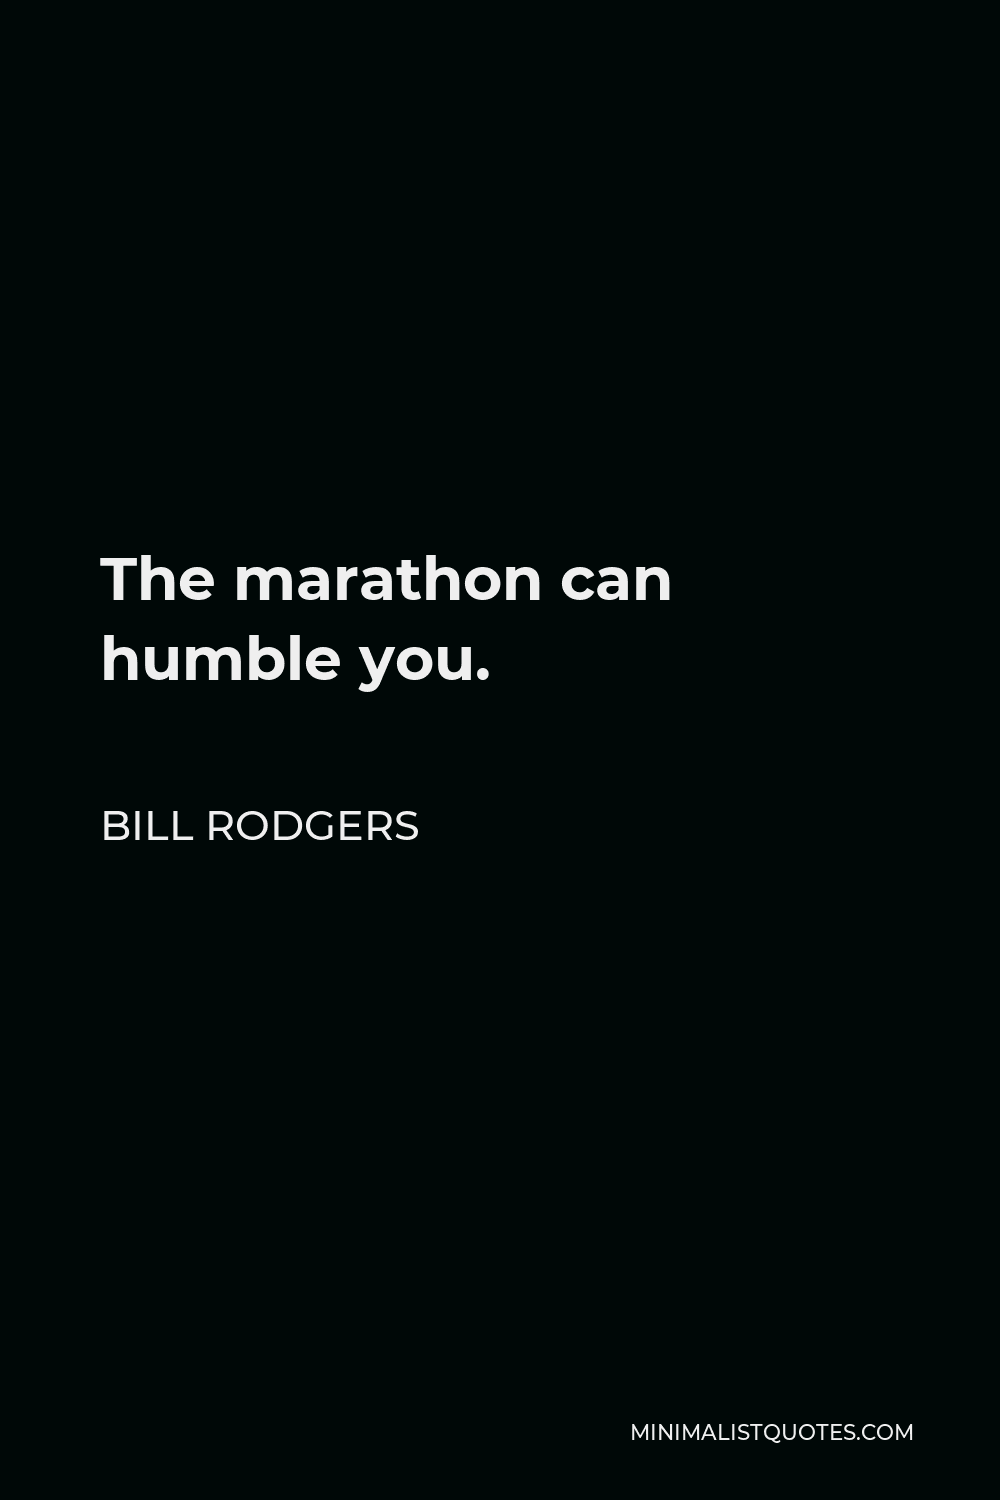 Bill Rodgers Quote - The marathon can humble you.